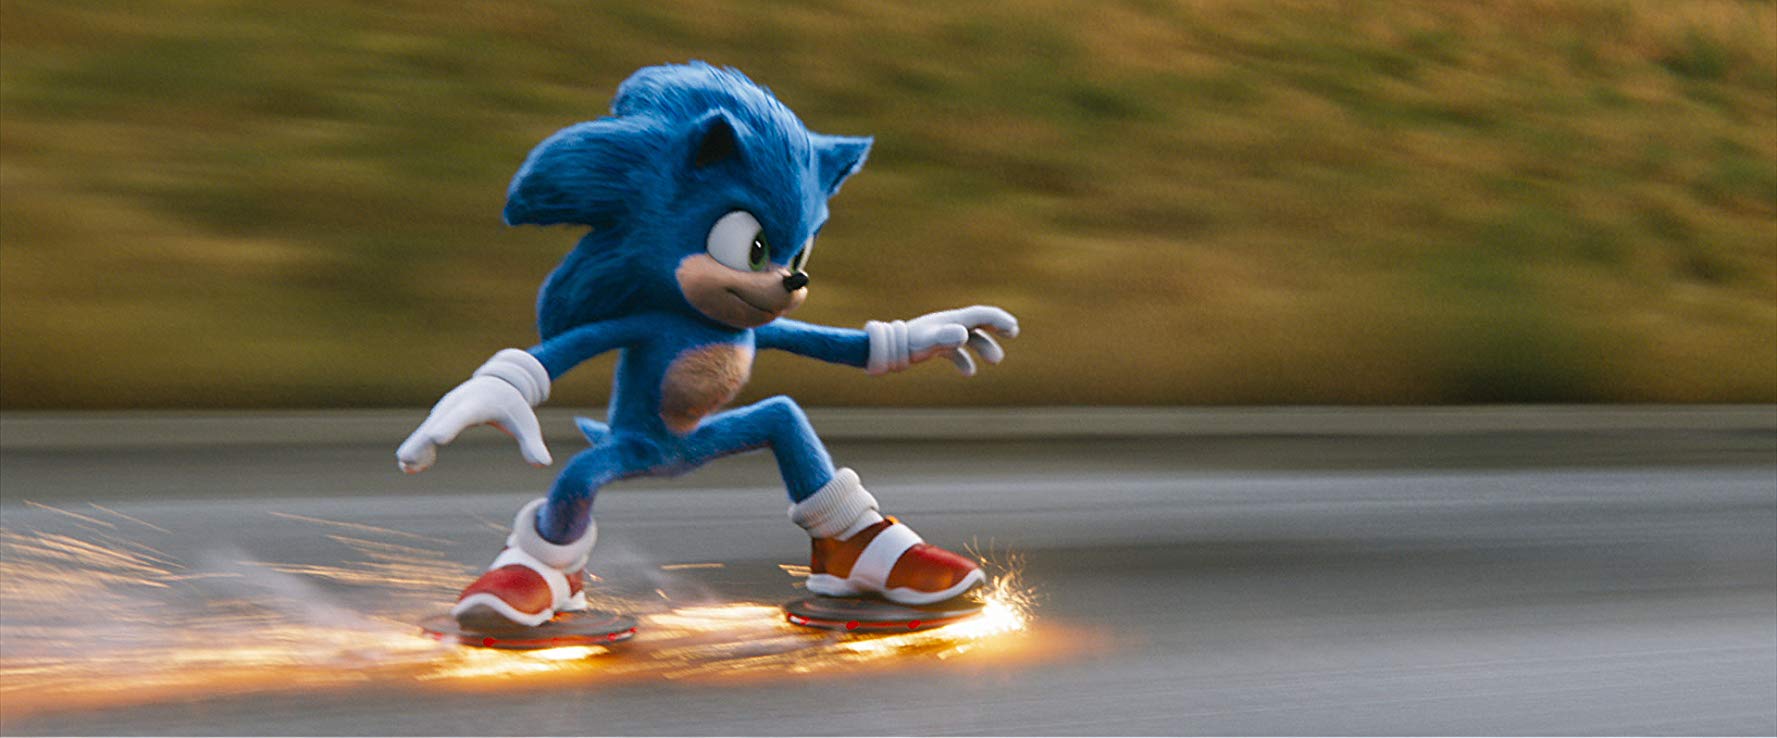 What if Forces had used the Hesse Sonic design for Classic Sonic